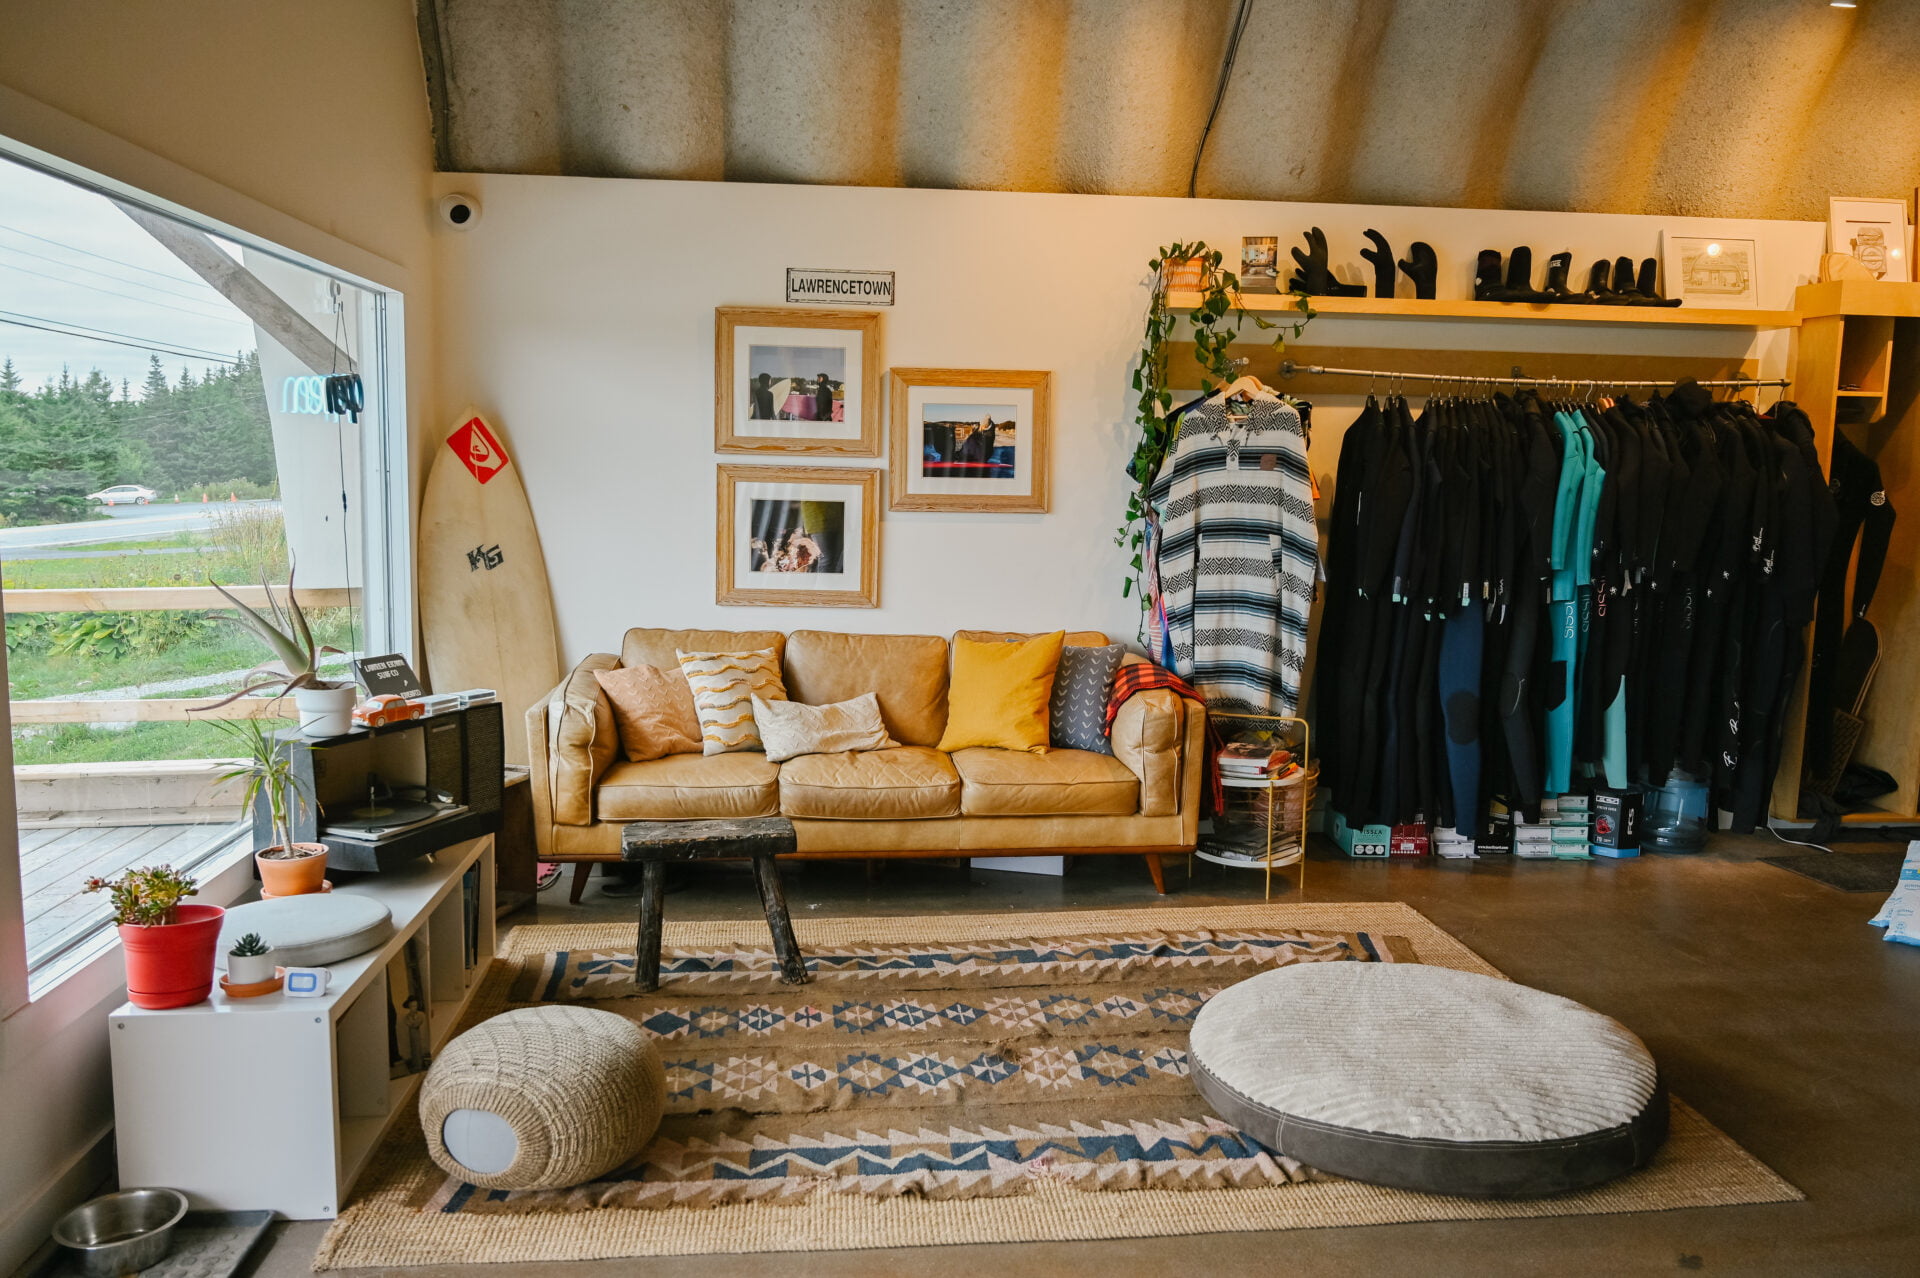 inside view of the lawrencetown surf co shop